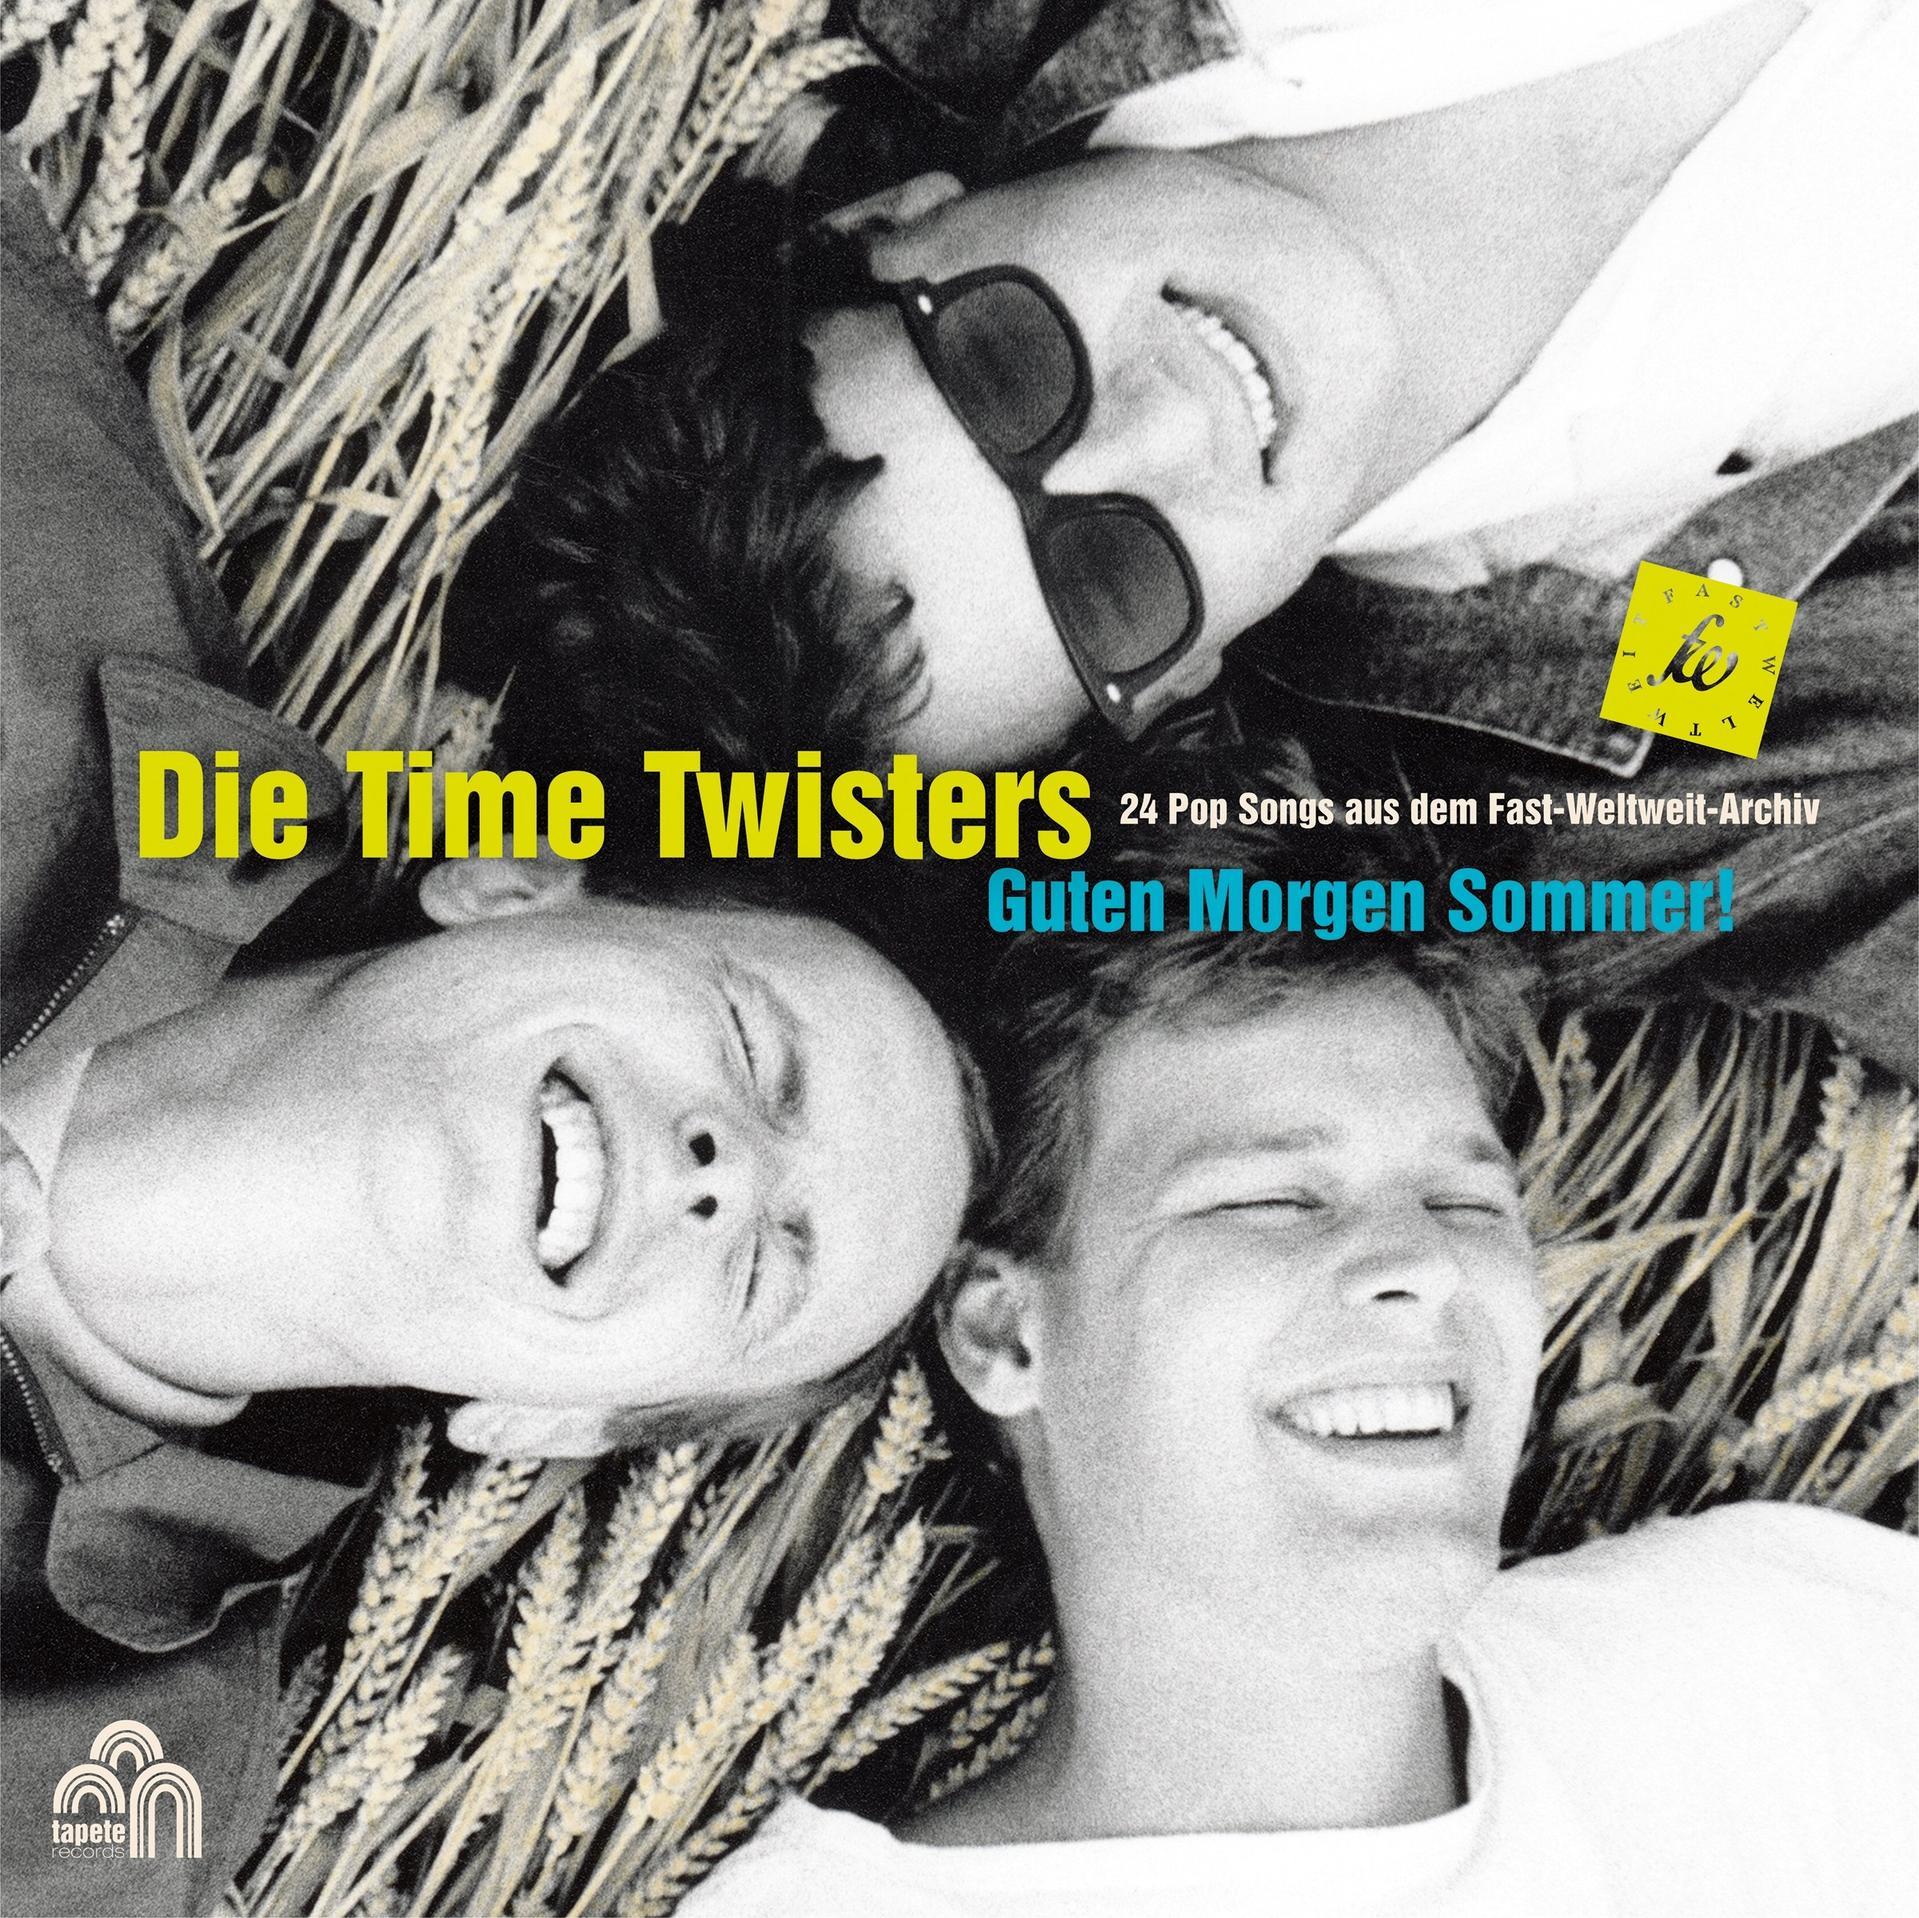 - Morgen Best Of Sommer (CD) Twisters Twisters (The Die Guten Time - Time